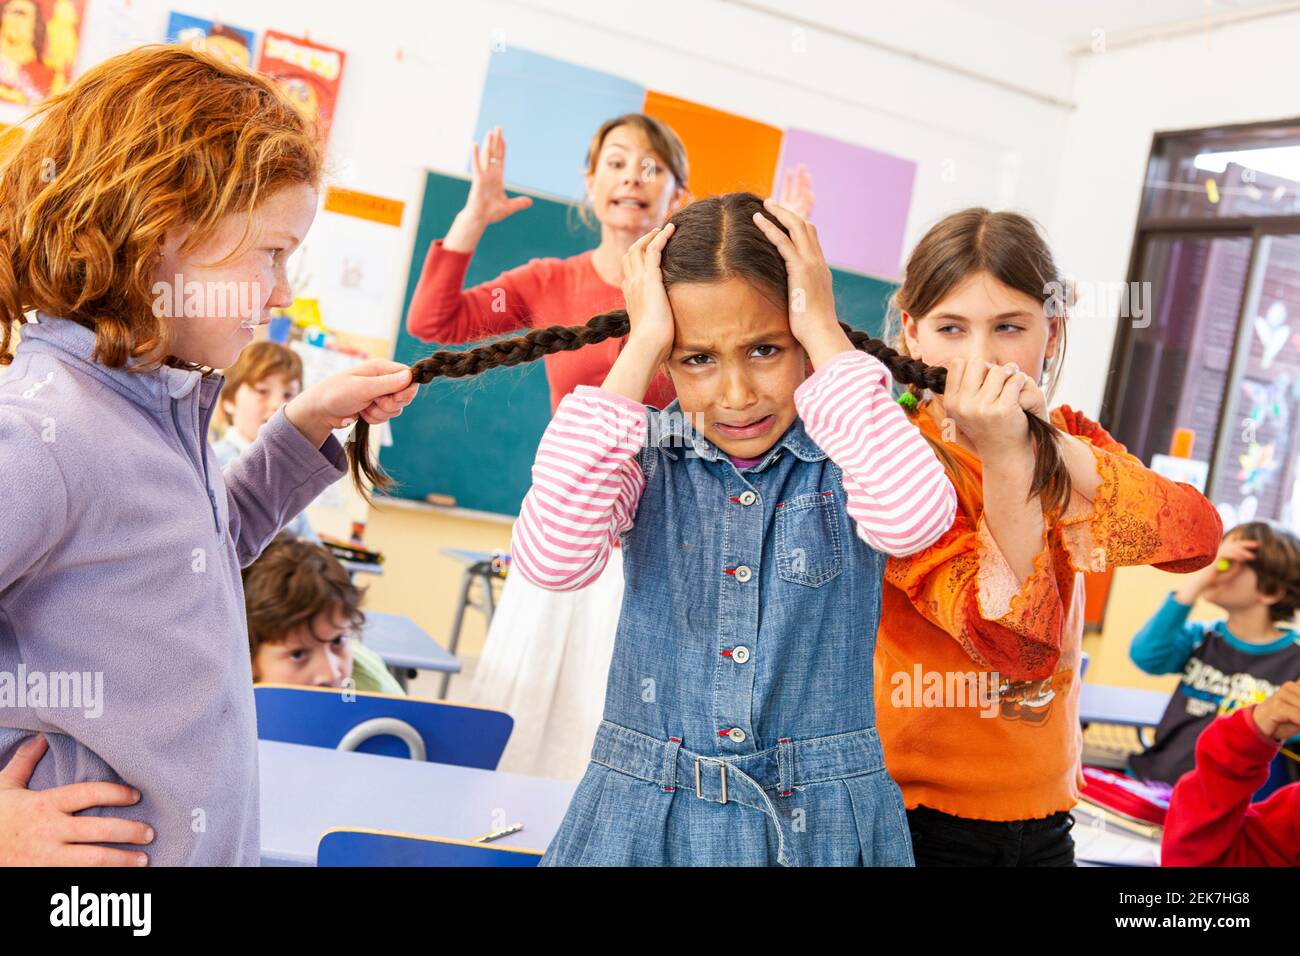 Bullying in a school classroom Stock Photo